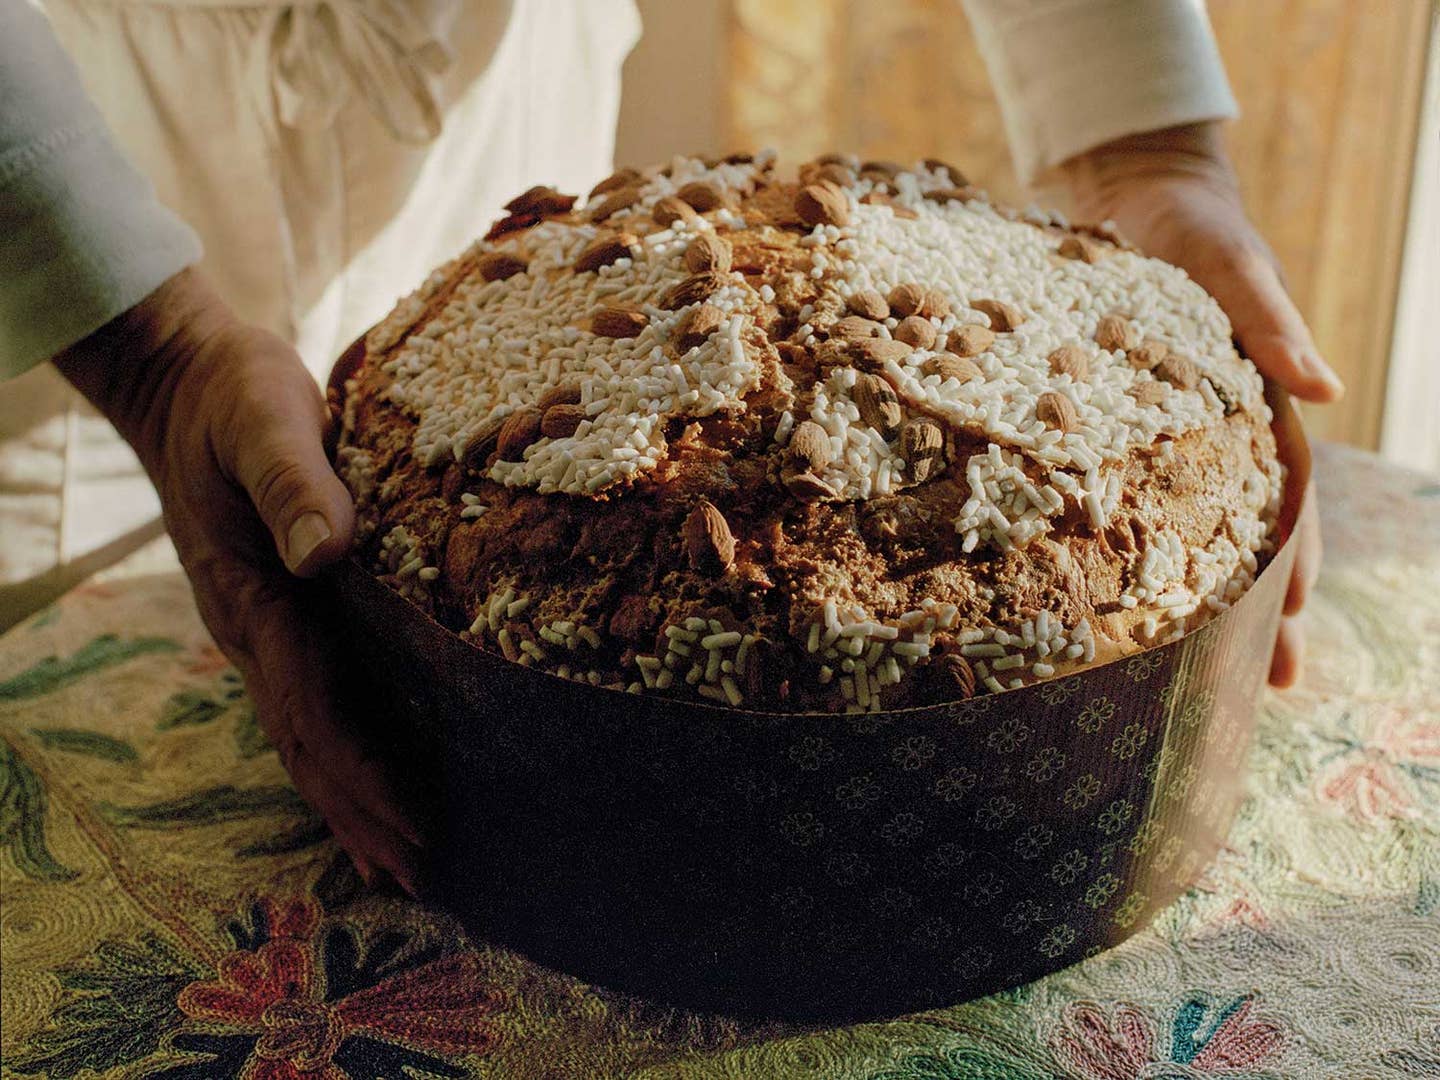 This Italian Town Always Smells Like Panettone